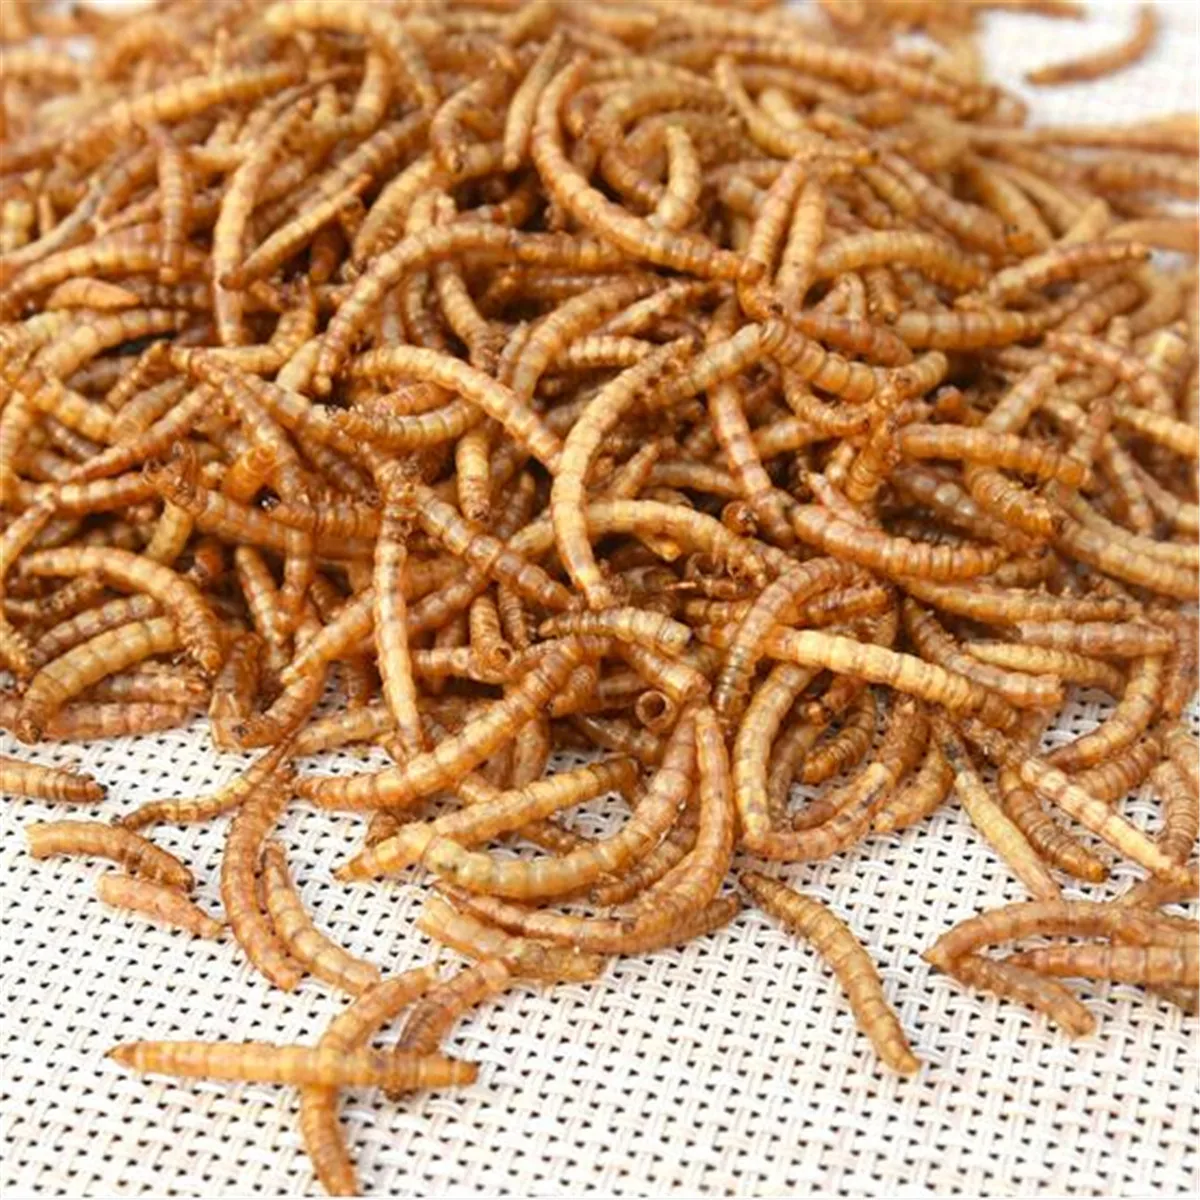 Dried Mealworms Wild Garden Bird Feed Food Meal Worm Chicken Reptile Fish